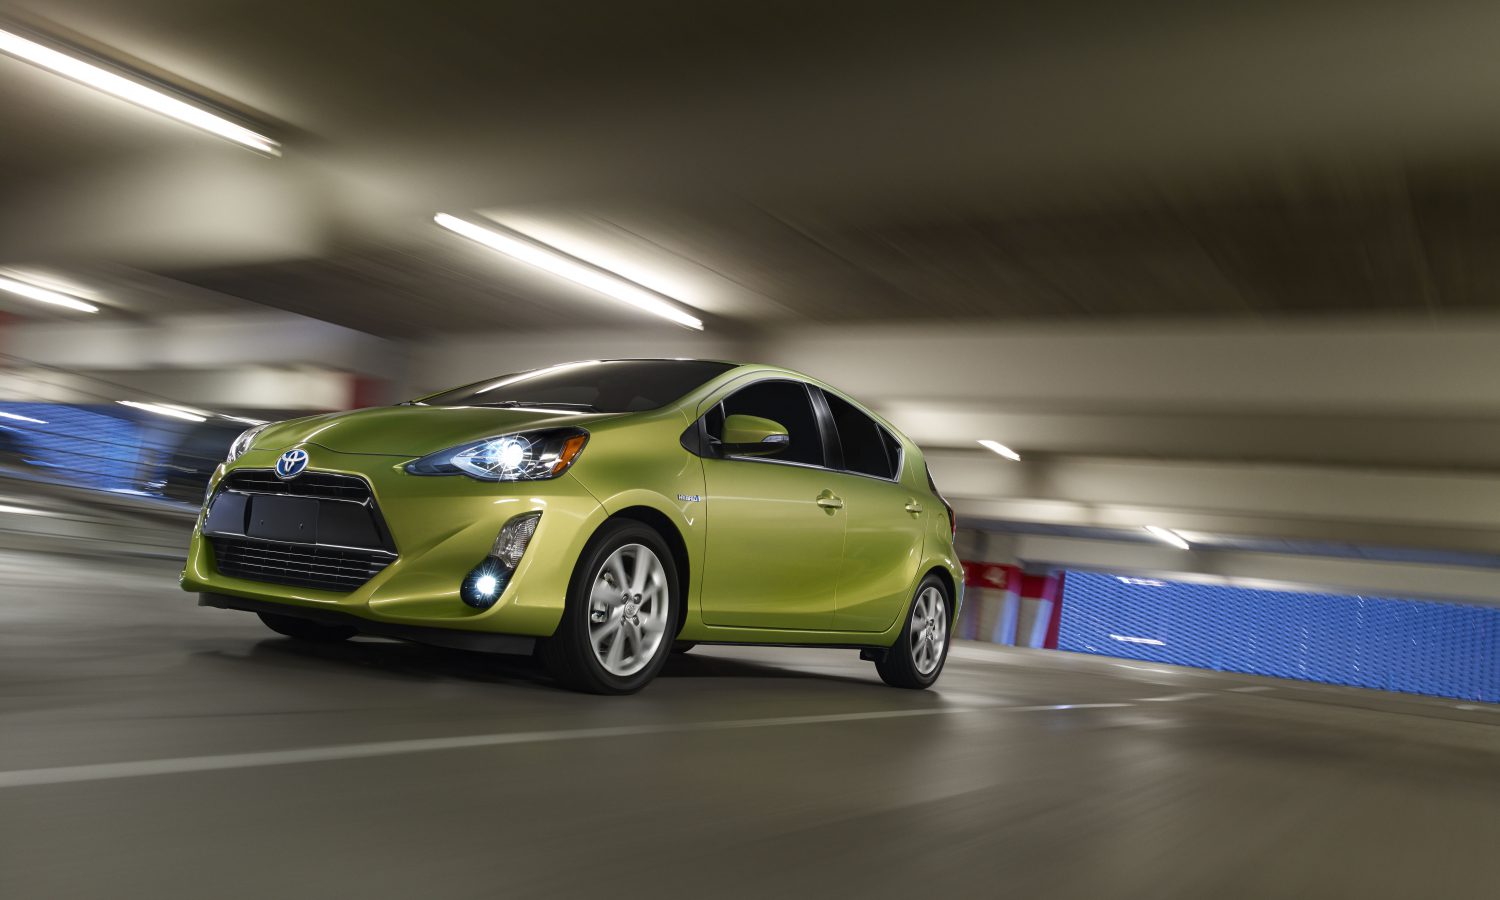 Toyota Announces Pricing for Refreshed 2015 Prius c - Toyota USA Newsroom